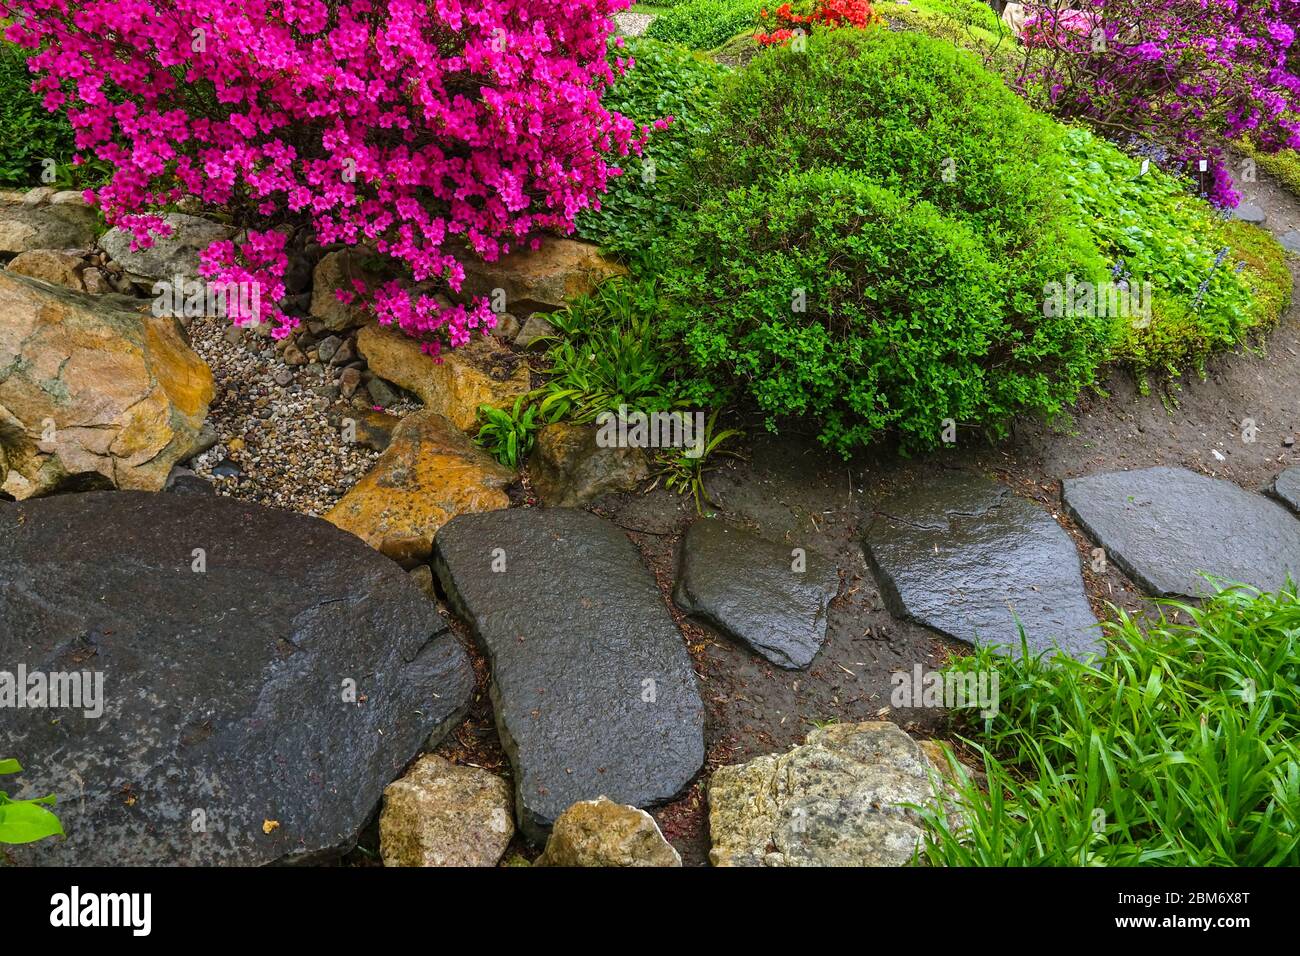 Stepping stones in Japanese garden stone path blossoming rhododendrons, boxwood flowering shrubs spring Stock Photo